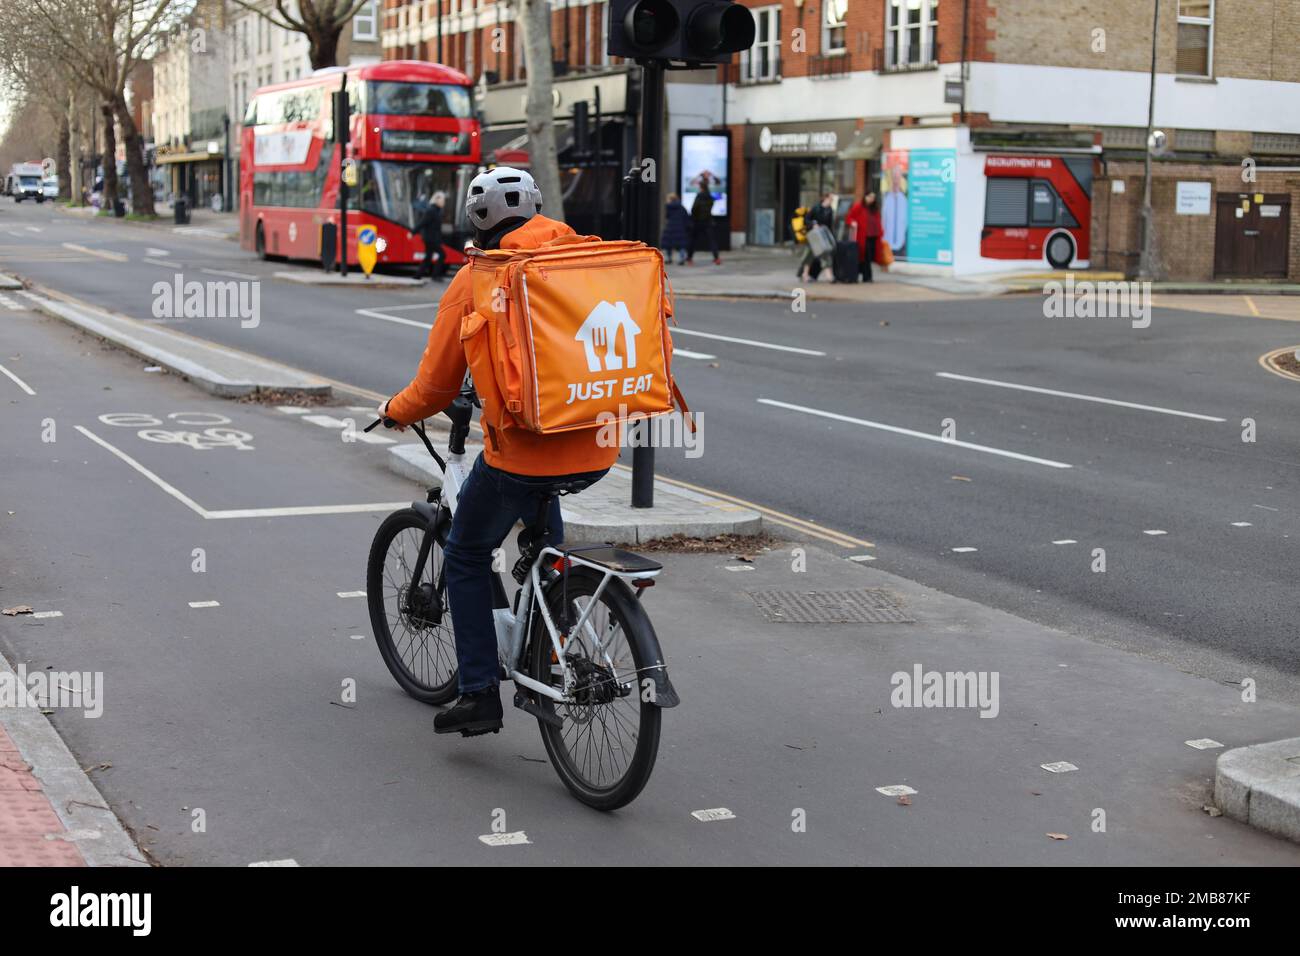 London - Just Eat delivery cyclist riding in cycle lane. Credit: Sinai Noor/Alamy Stock Photo